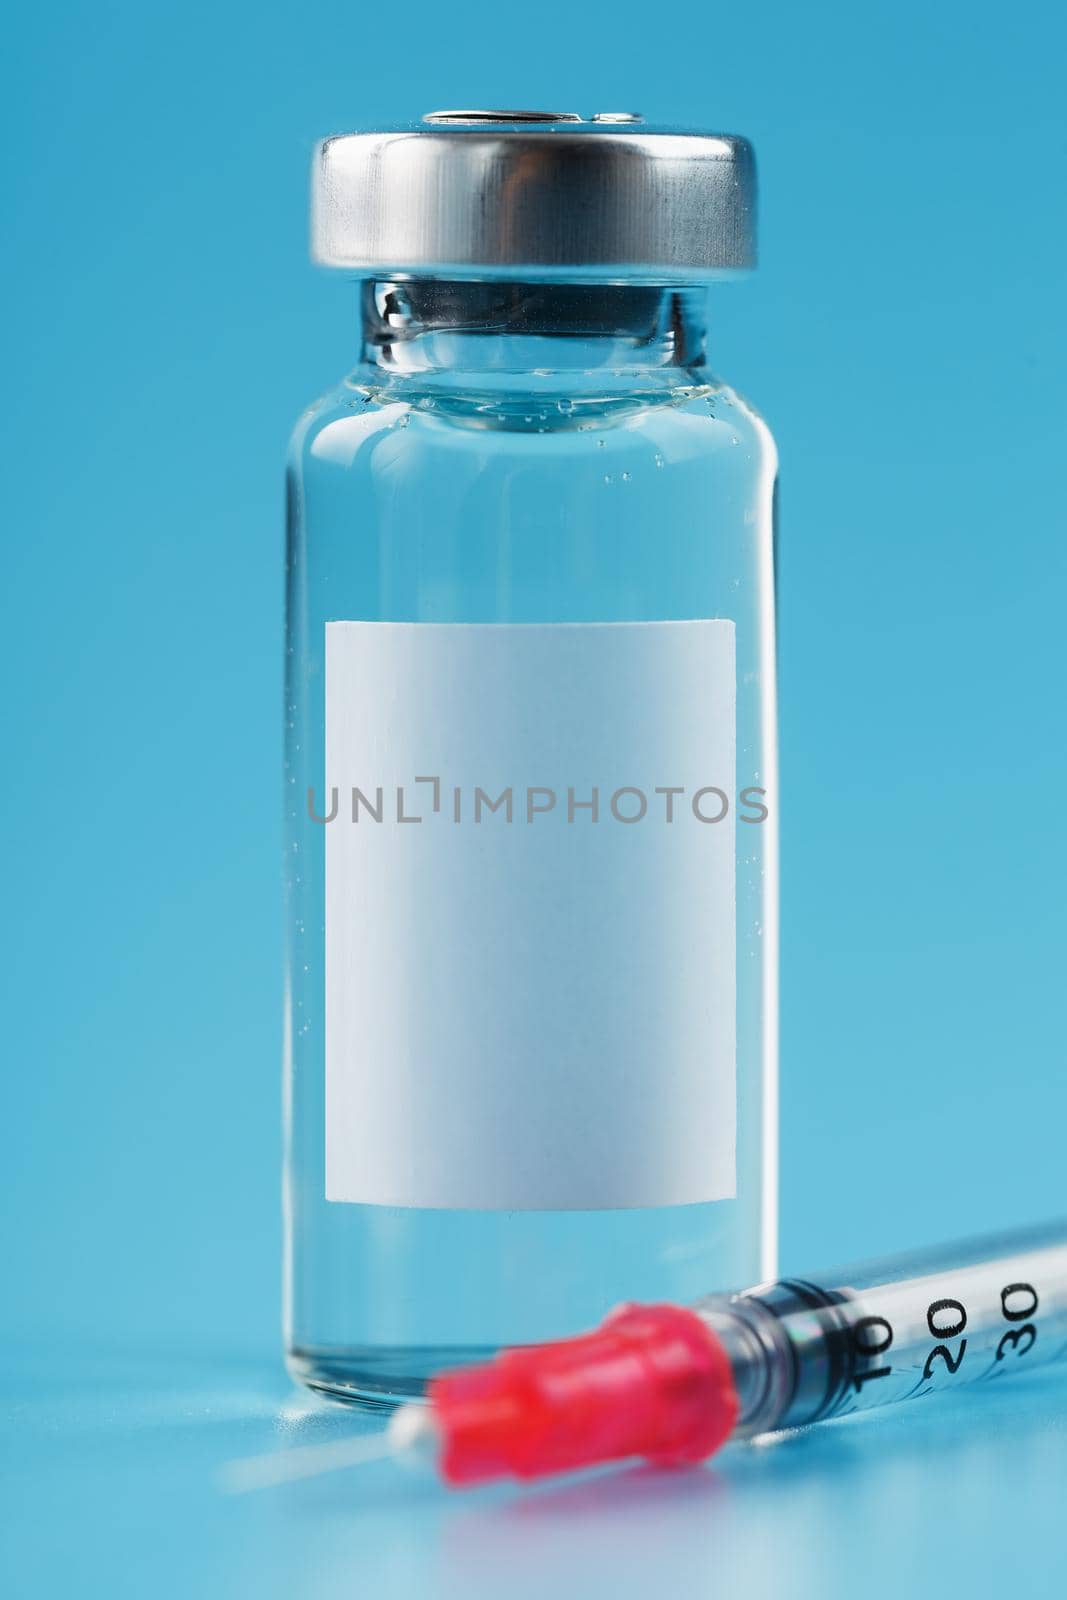 Ampoule with a vaccine and a syringe for viruses and diseases on a blue background. Free space on the ampoule for text. Isolate, vertical frame